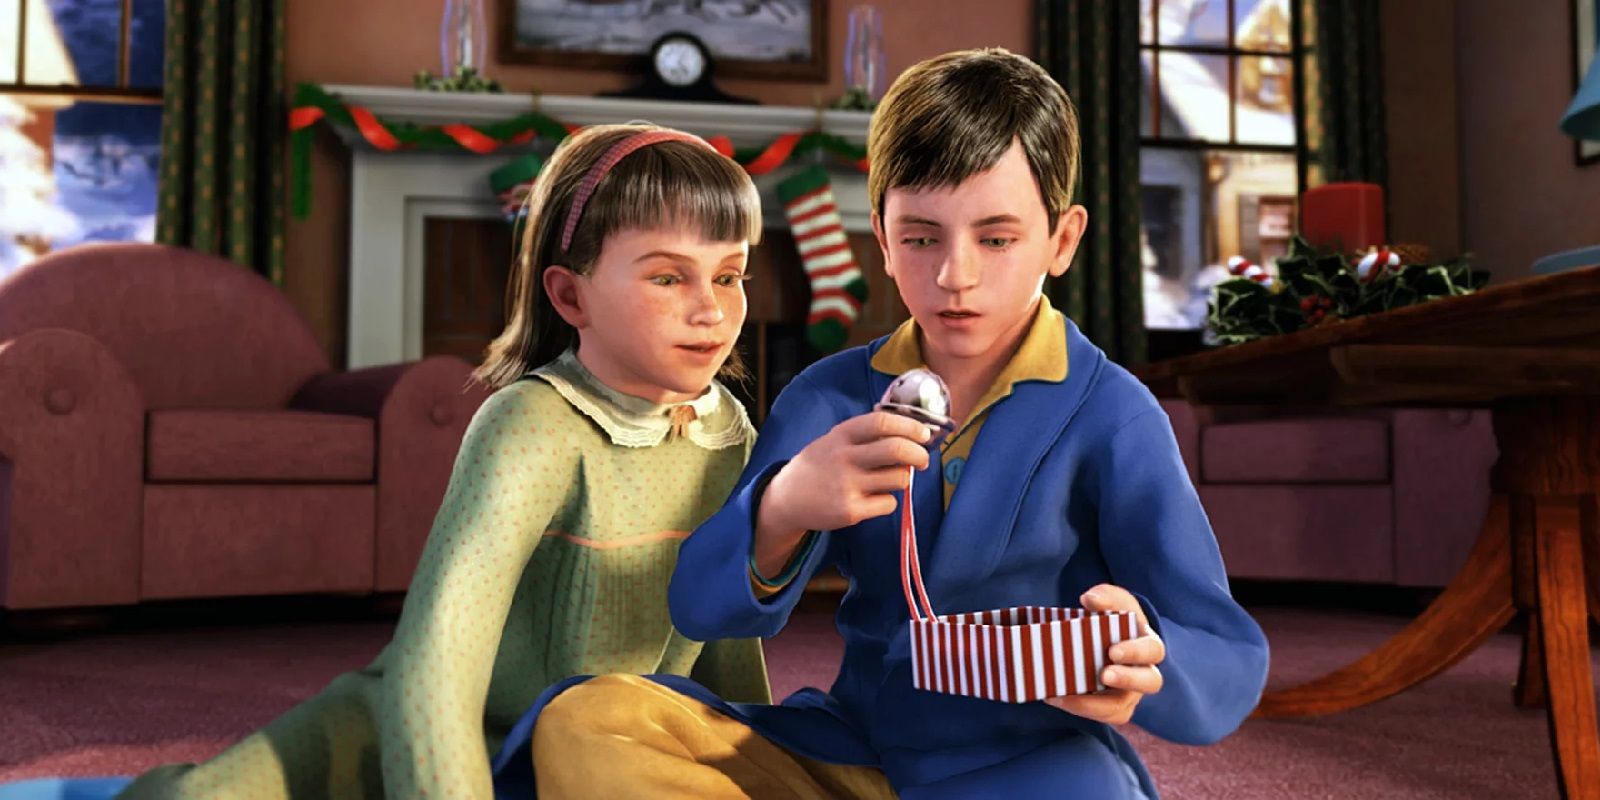 The Boy and his Sister opening presents in The Polar Express